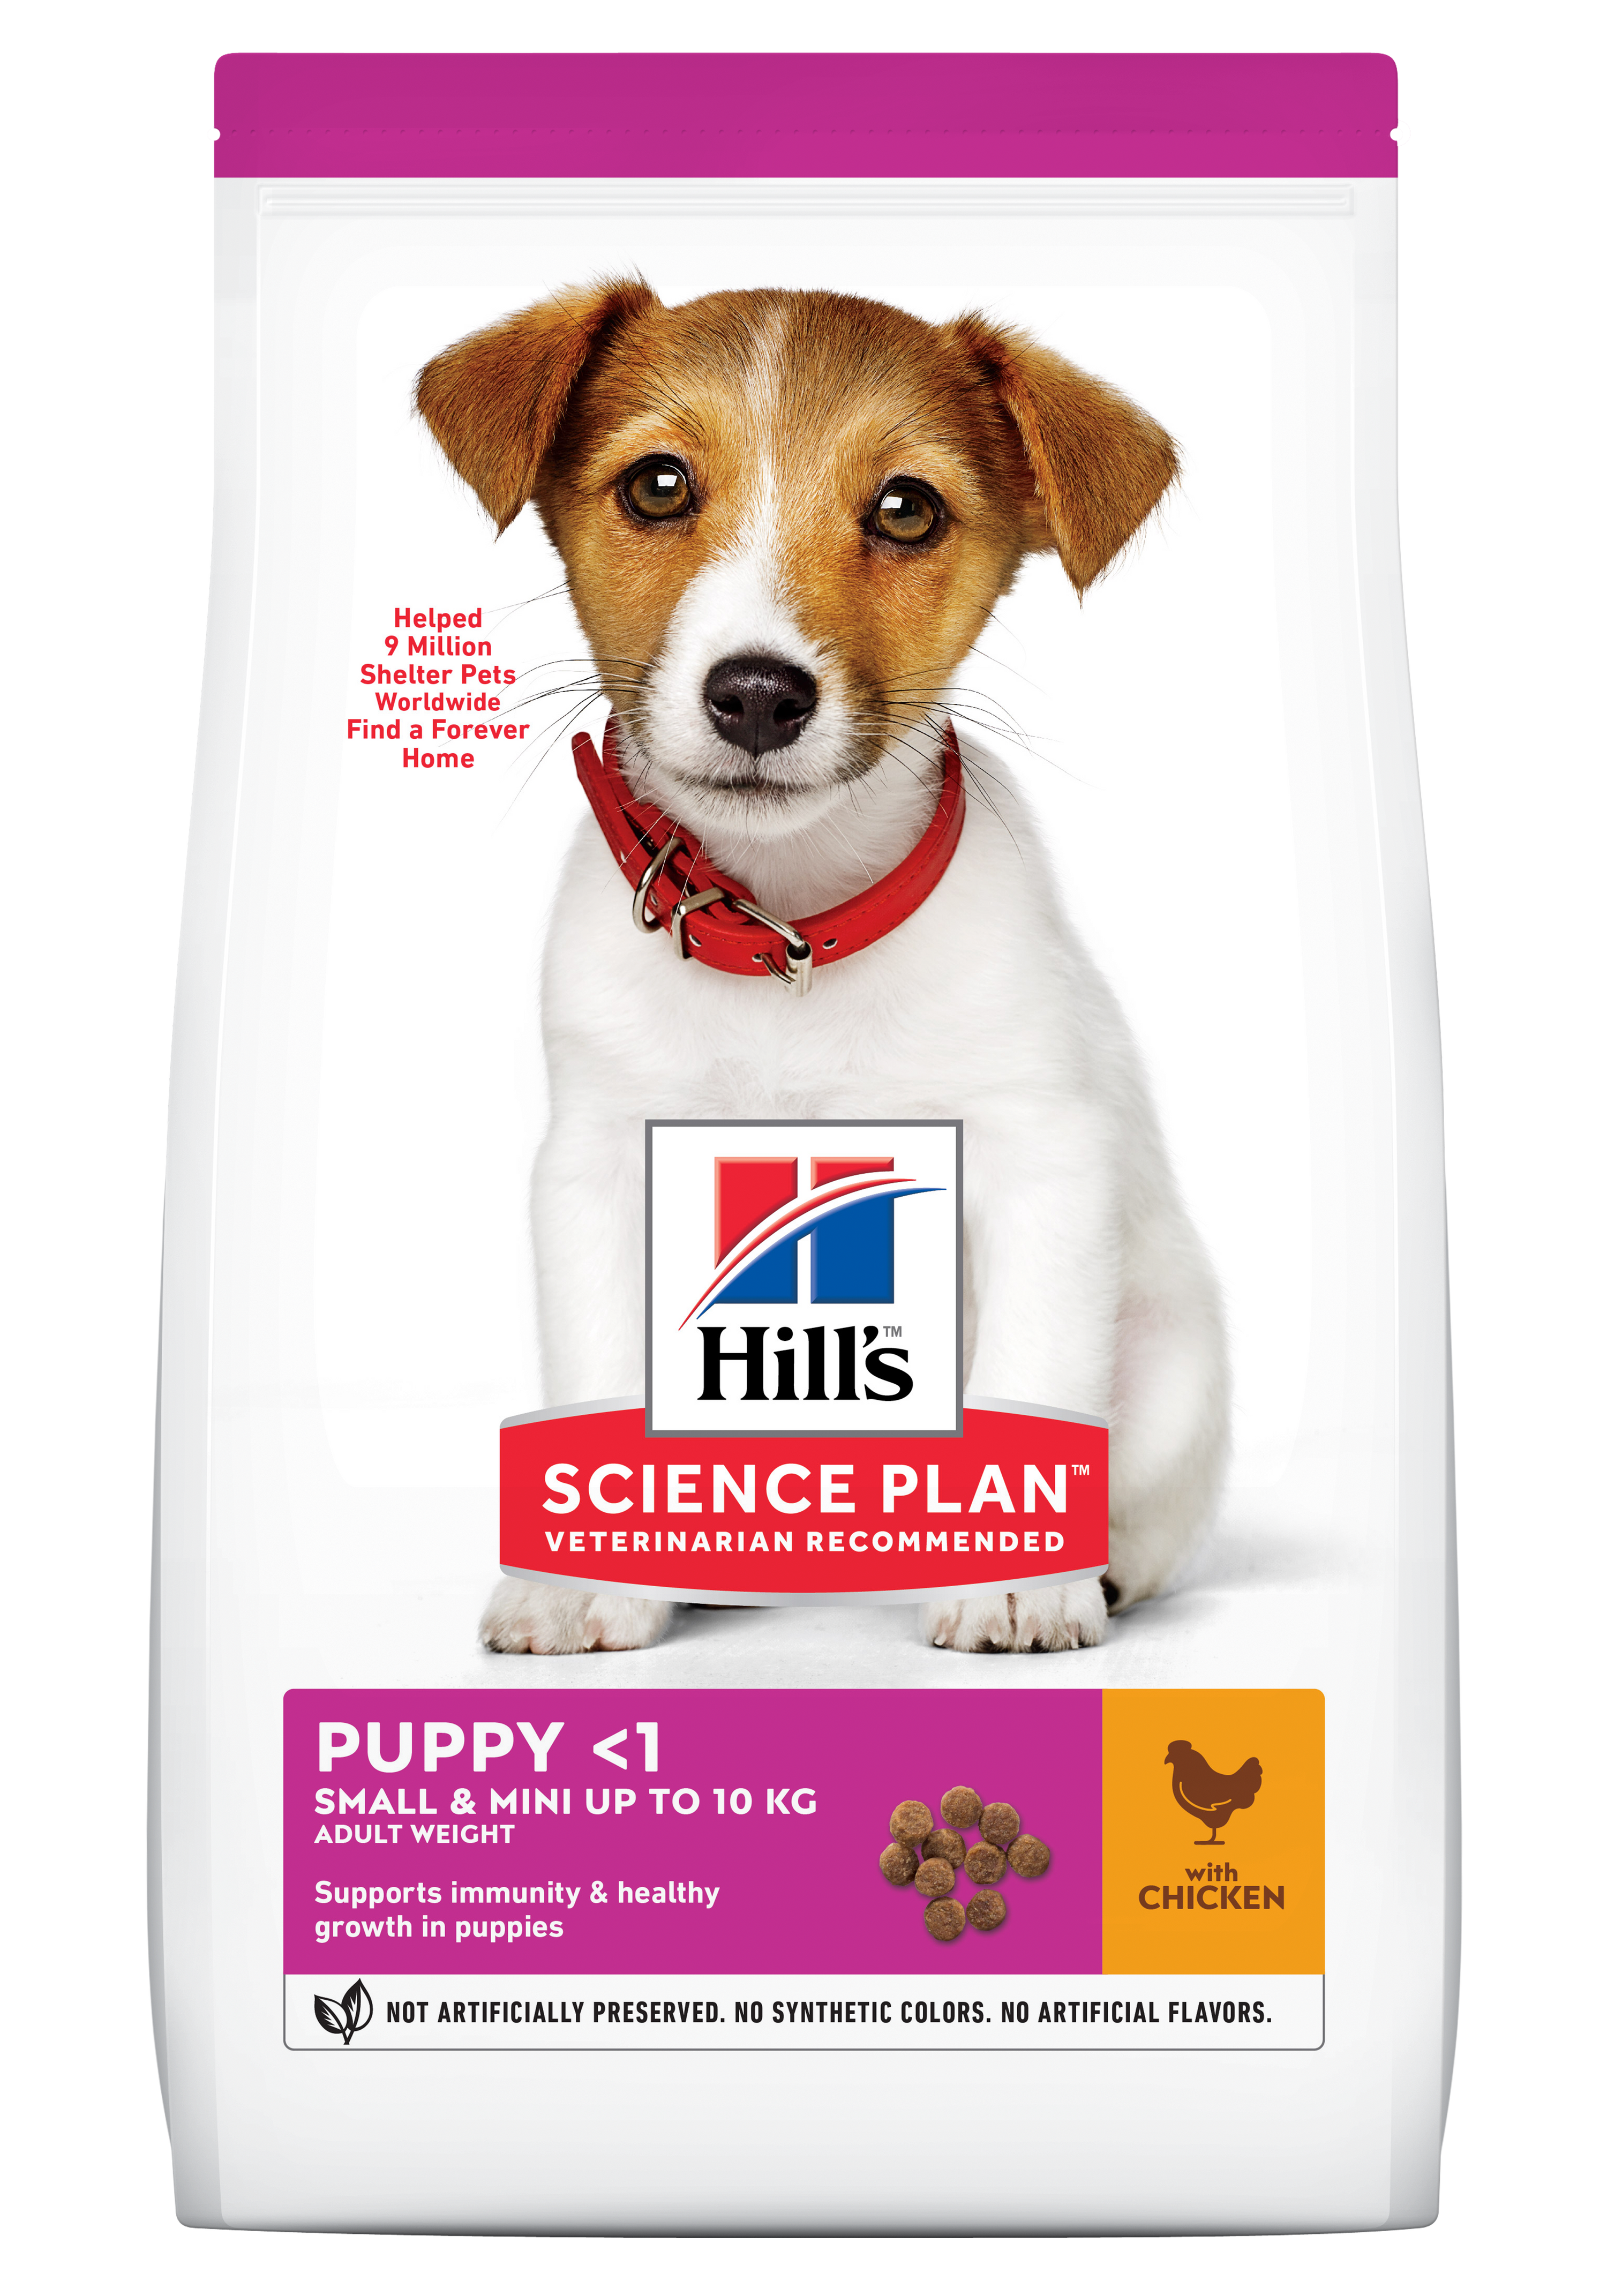 Hill’s Science Plan Canine Puppy Small and Mini Chicken, 6 kg and